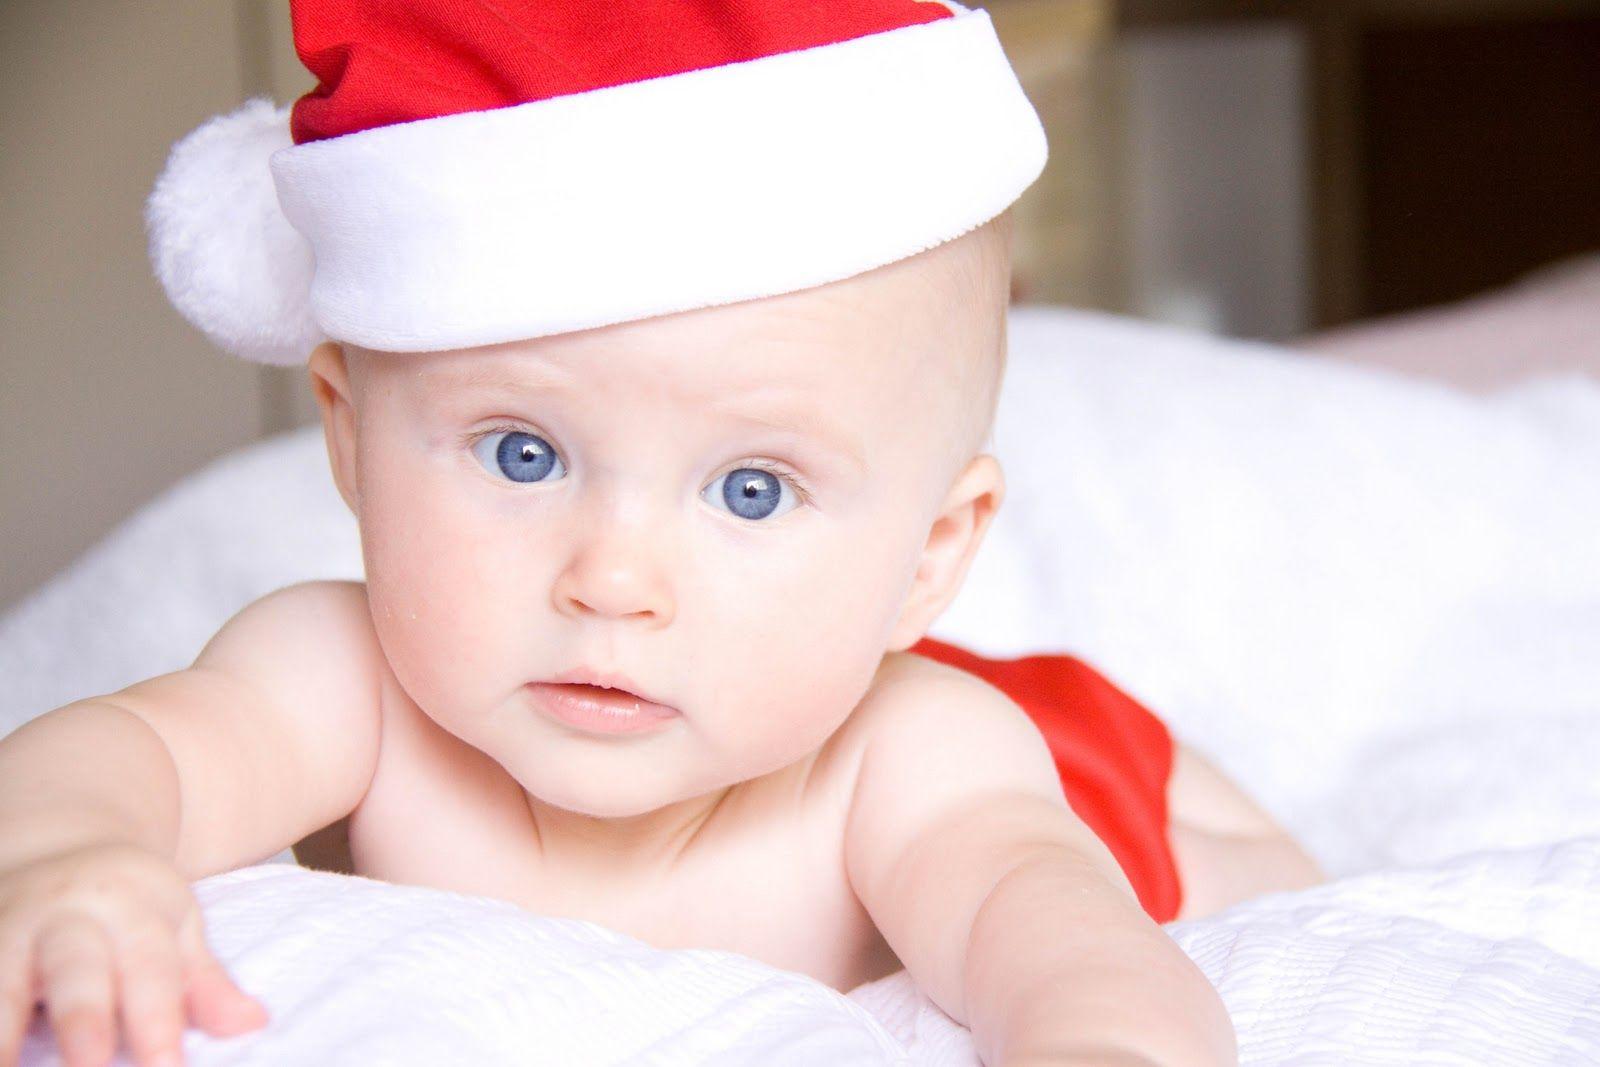 Tons of awesome cute baby boy hd wallpapers to download for free. 